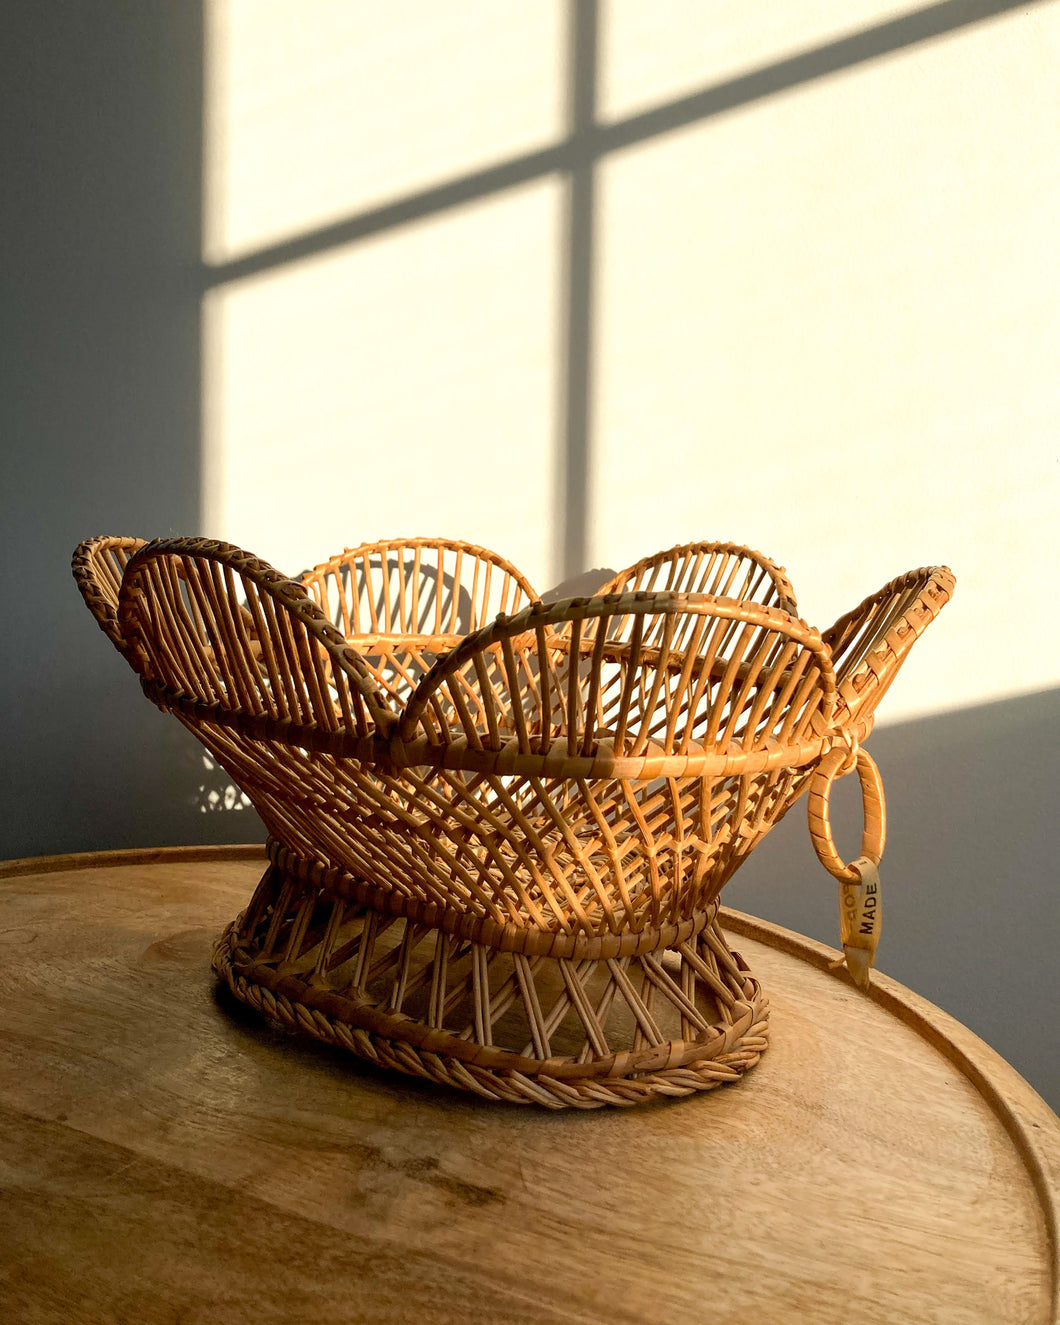 Woven Rattan Basket - Made in Portugal